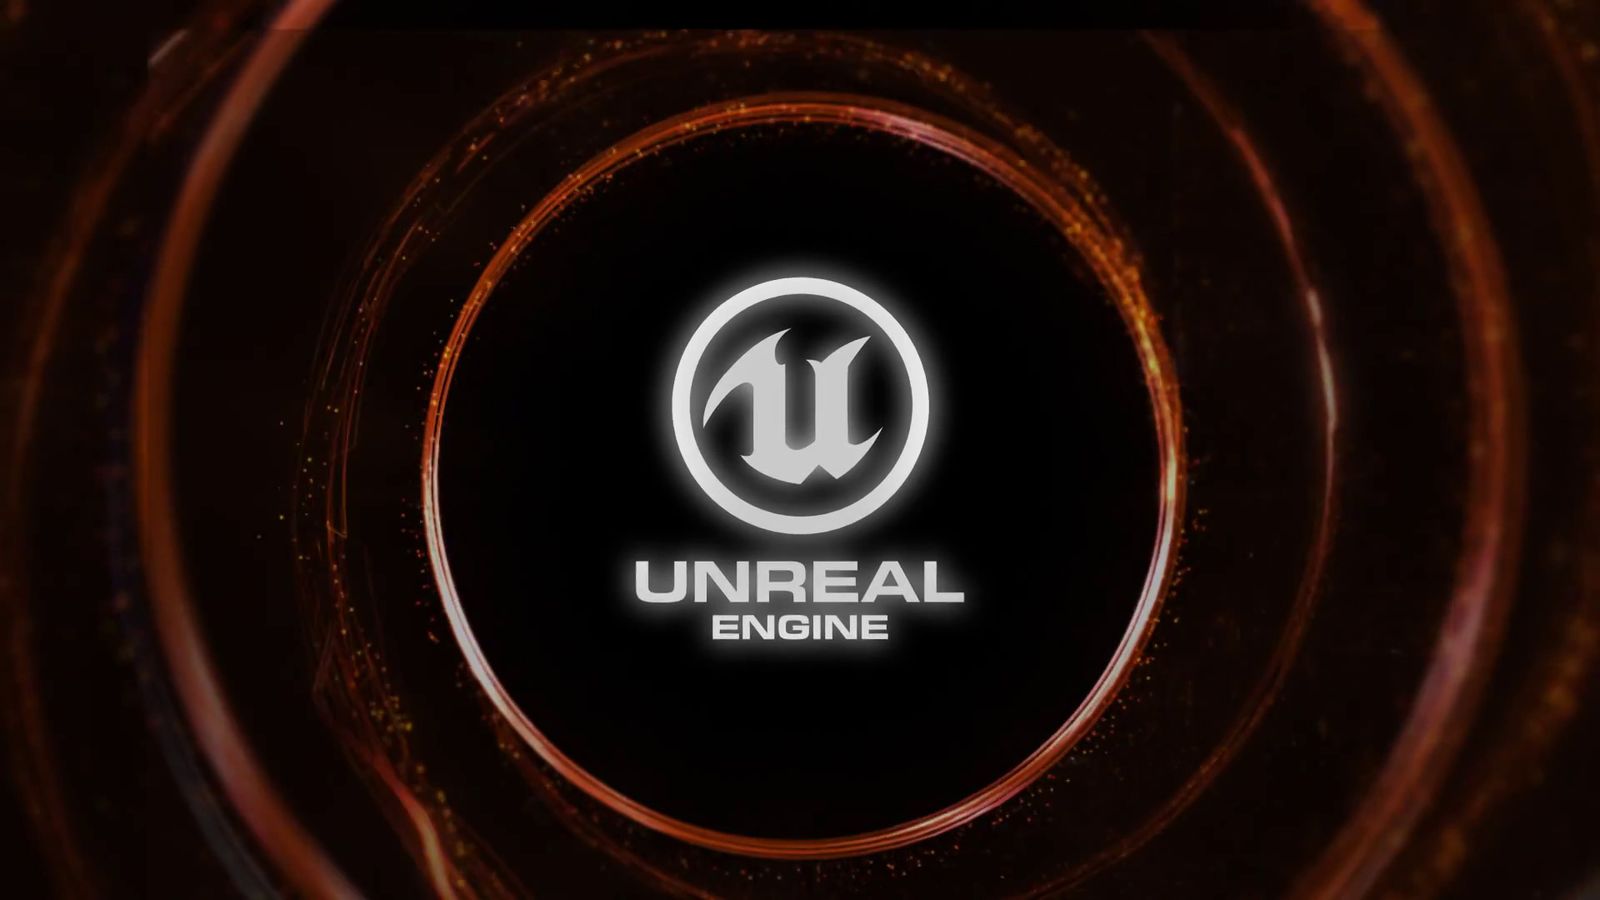 High Resolution Wallpaper | UnREAL 1600x900 px